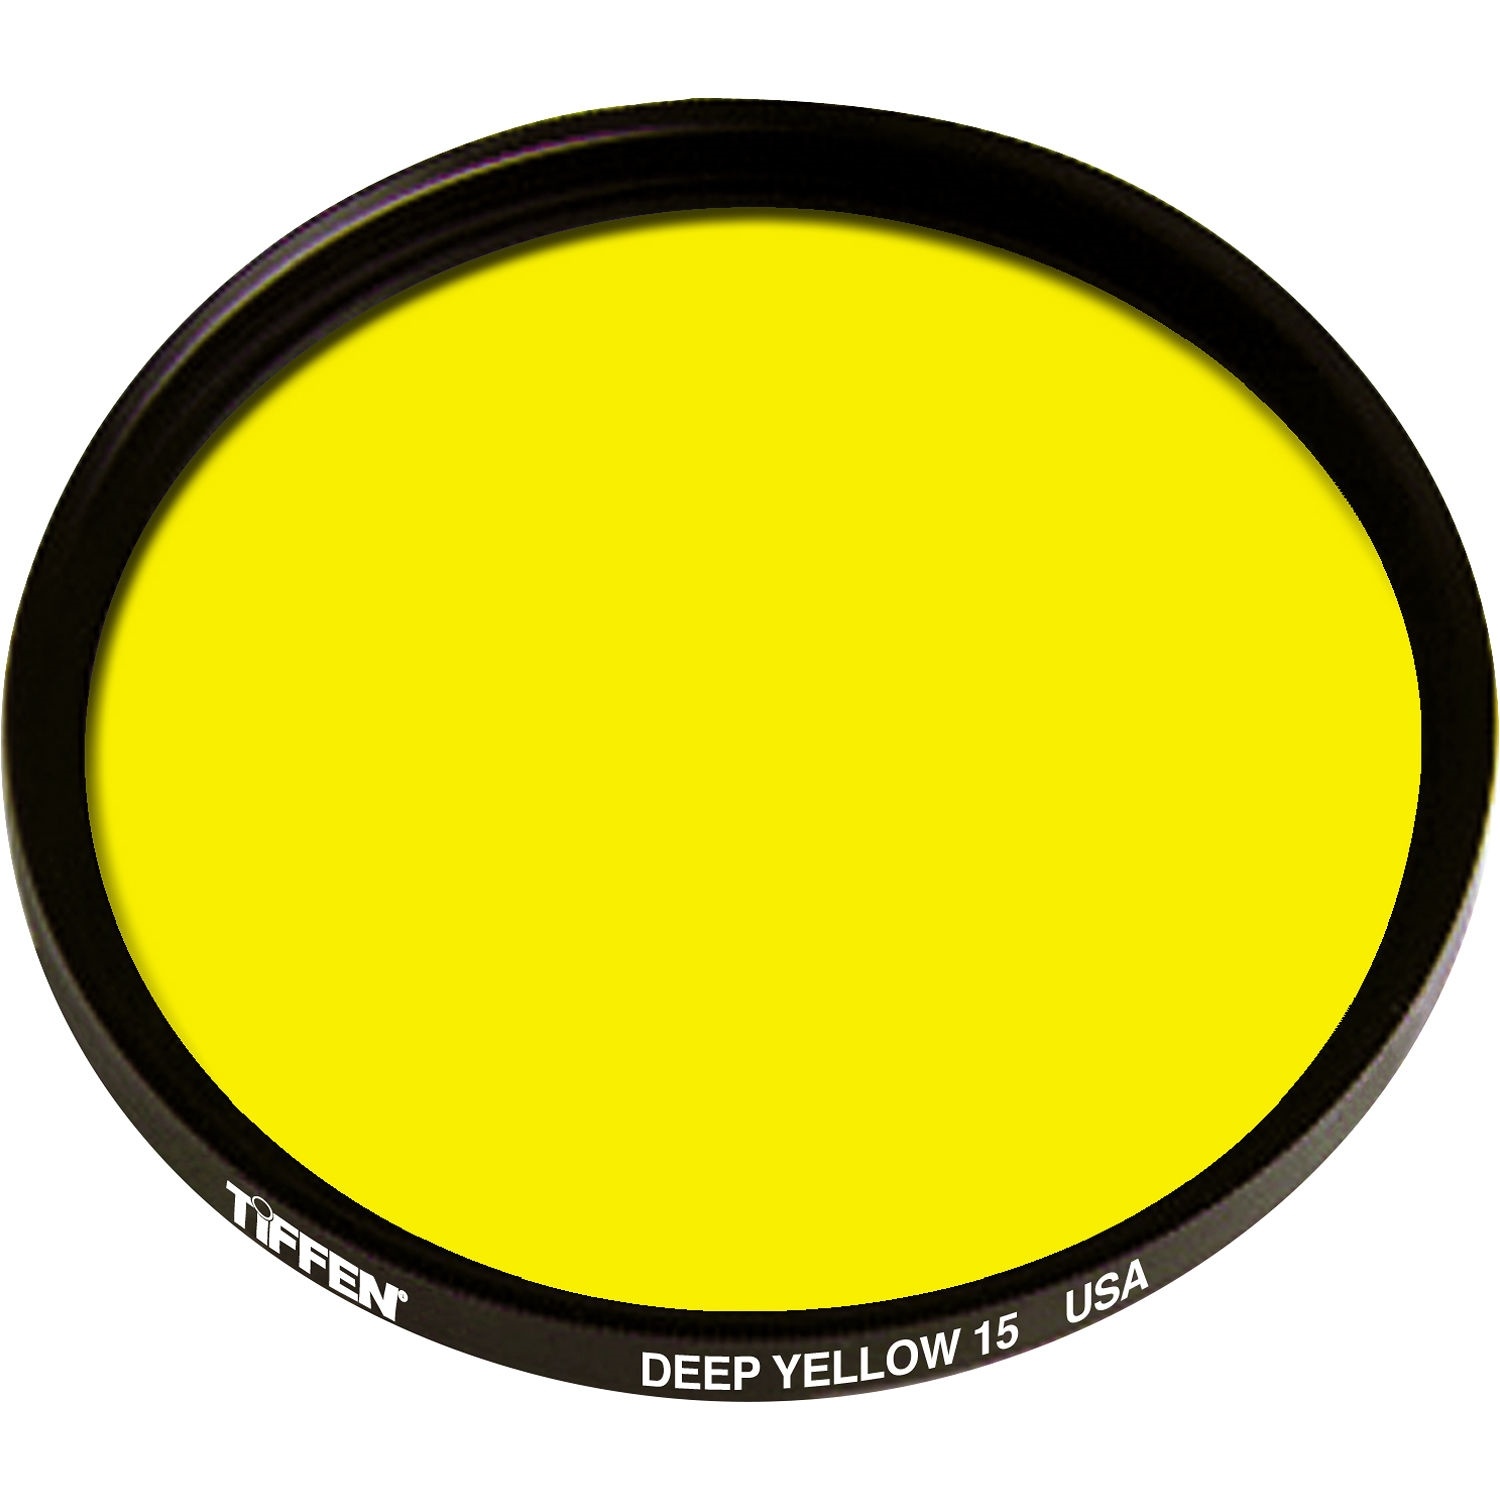 Tiffen 40.5mm Deep Yellow 15 Glass Filter for Black & White Film